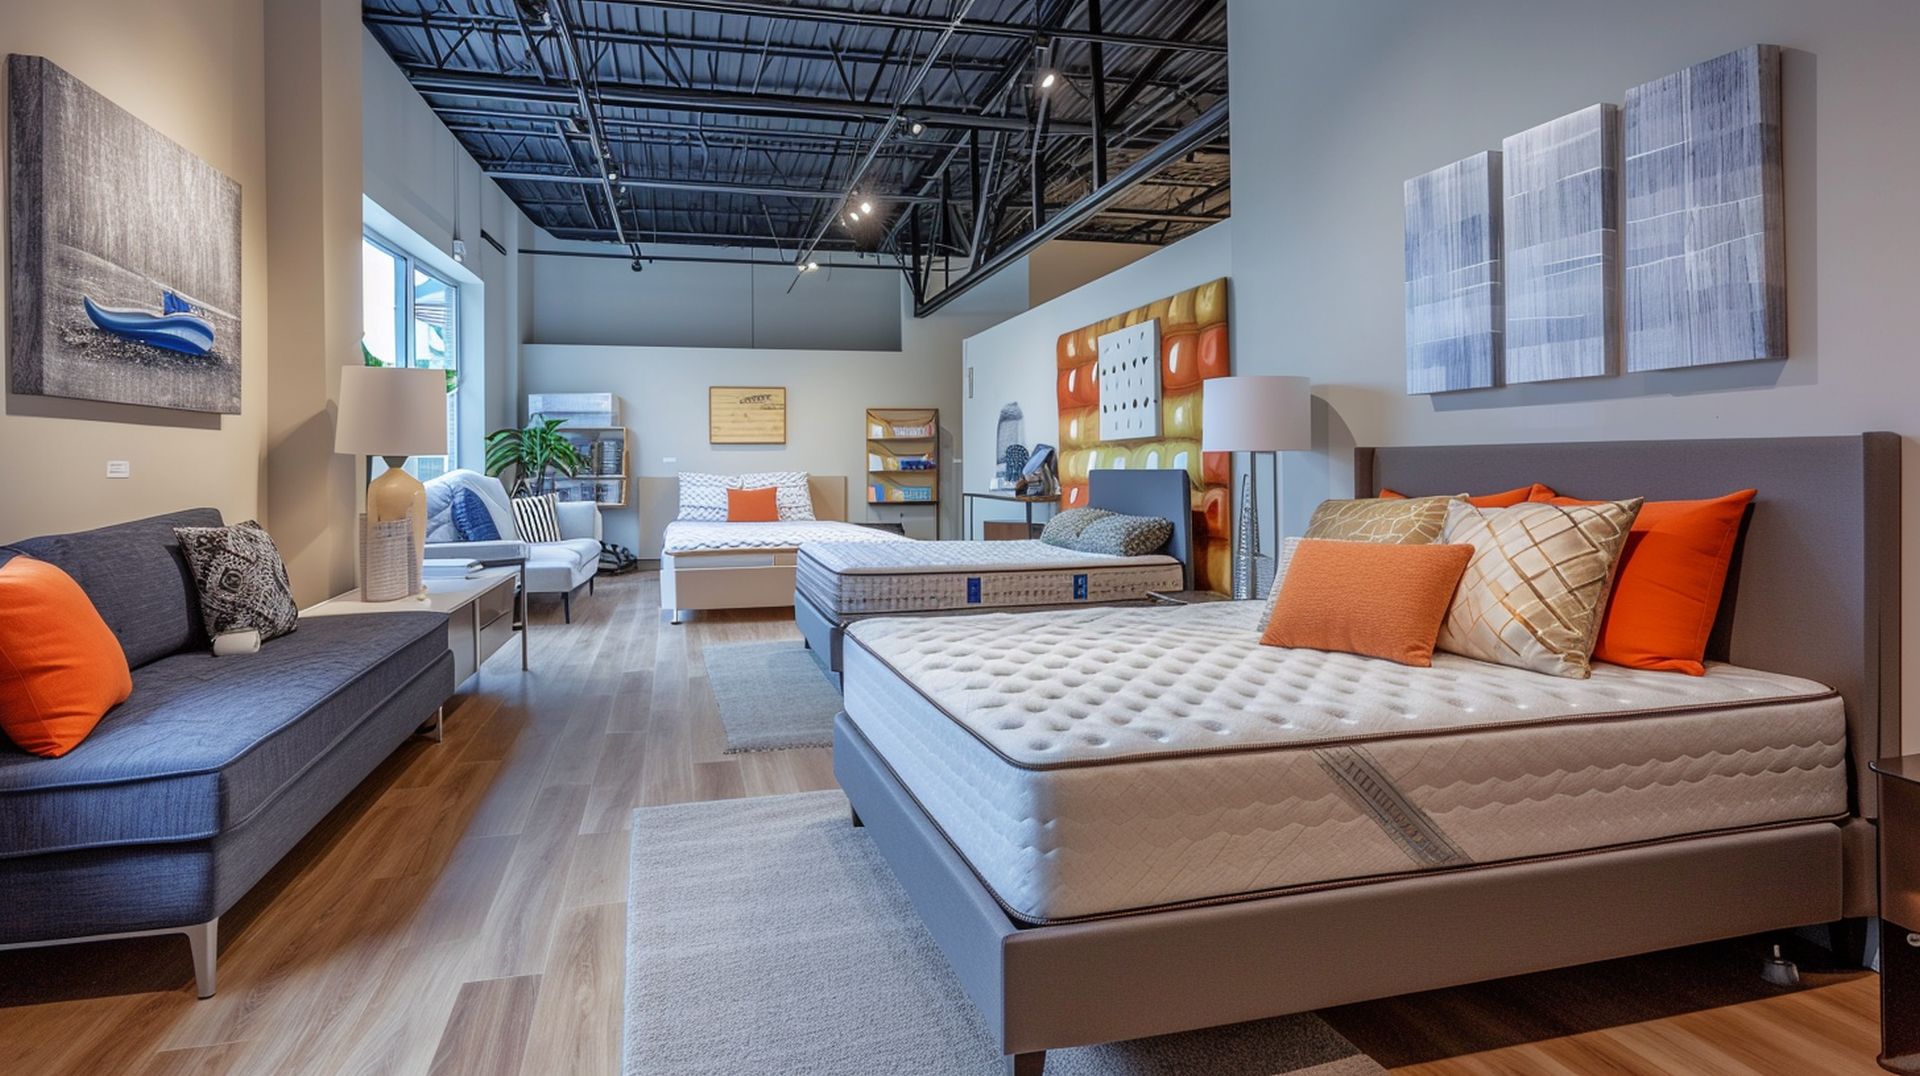 If you're looking for a new bed, mattress stores in Grand Island offer the best customer and delivery service, financing, and warranties in Nebraska